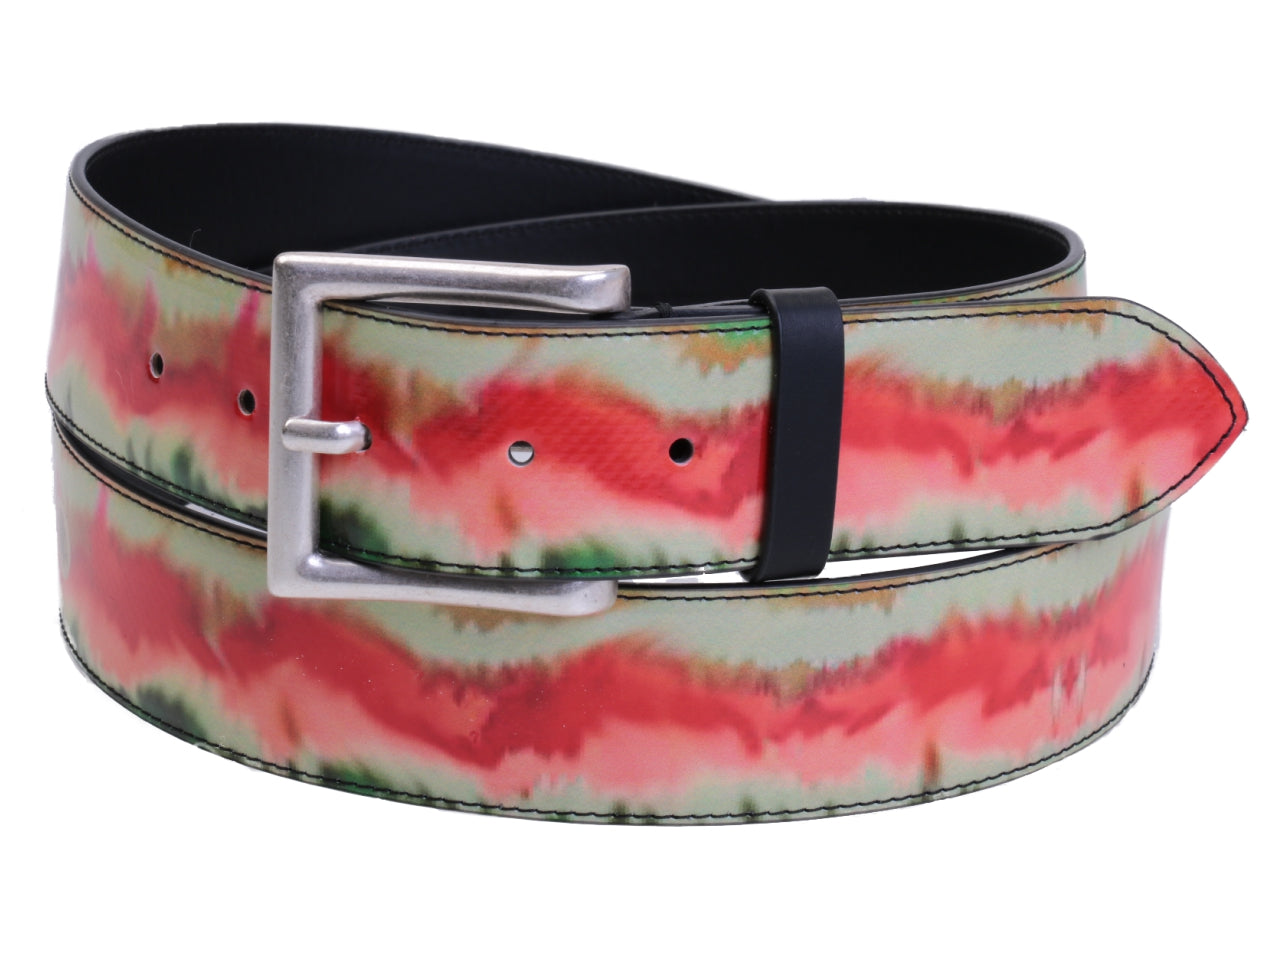 BEIGE AND SALMON MEN'S BELT WITH CAMOUFLAGE FANTASY MADE OF LORRY TARPAULIN. - Unique Pieces Paul Meccanico